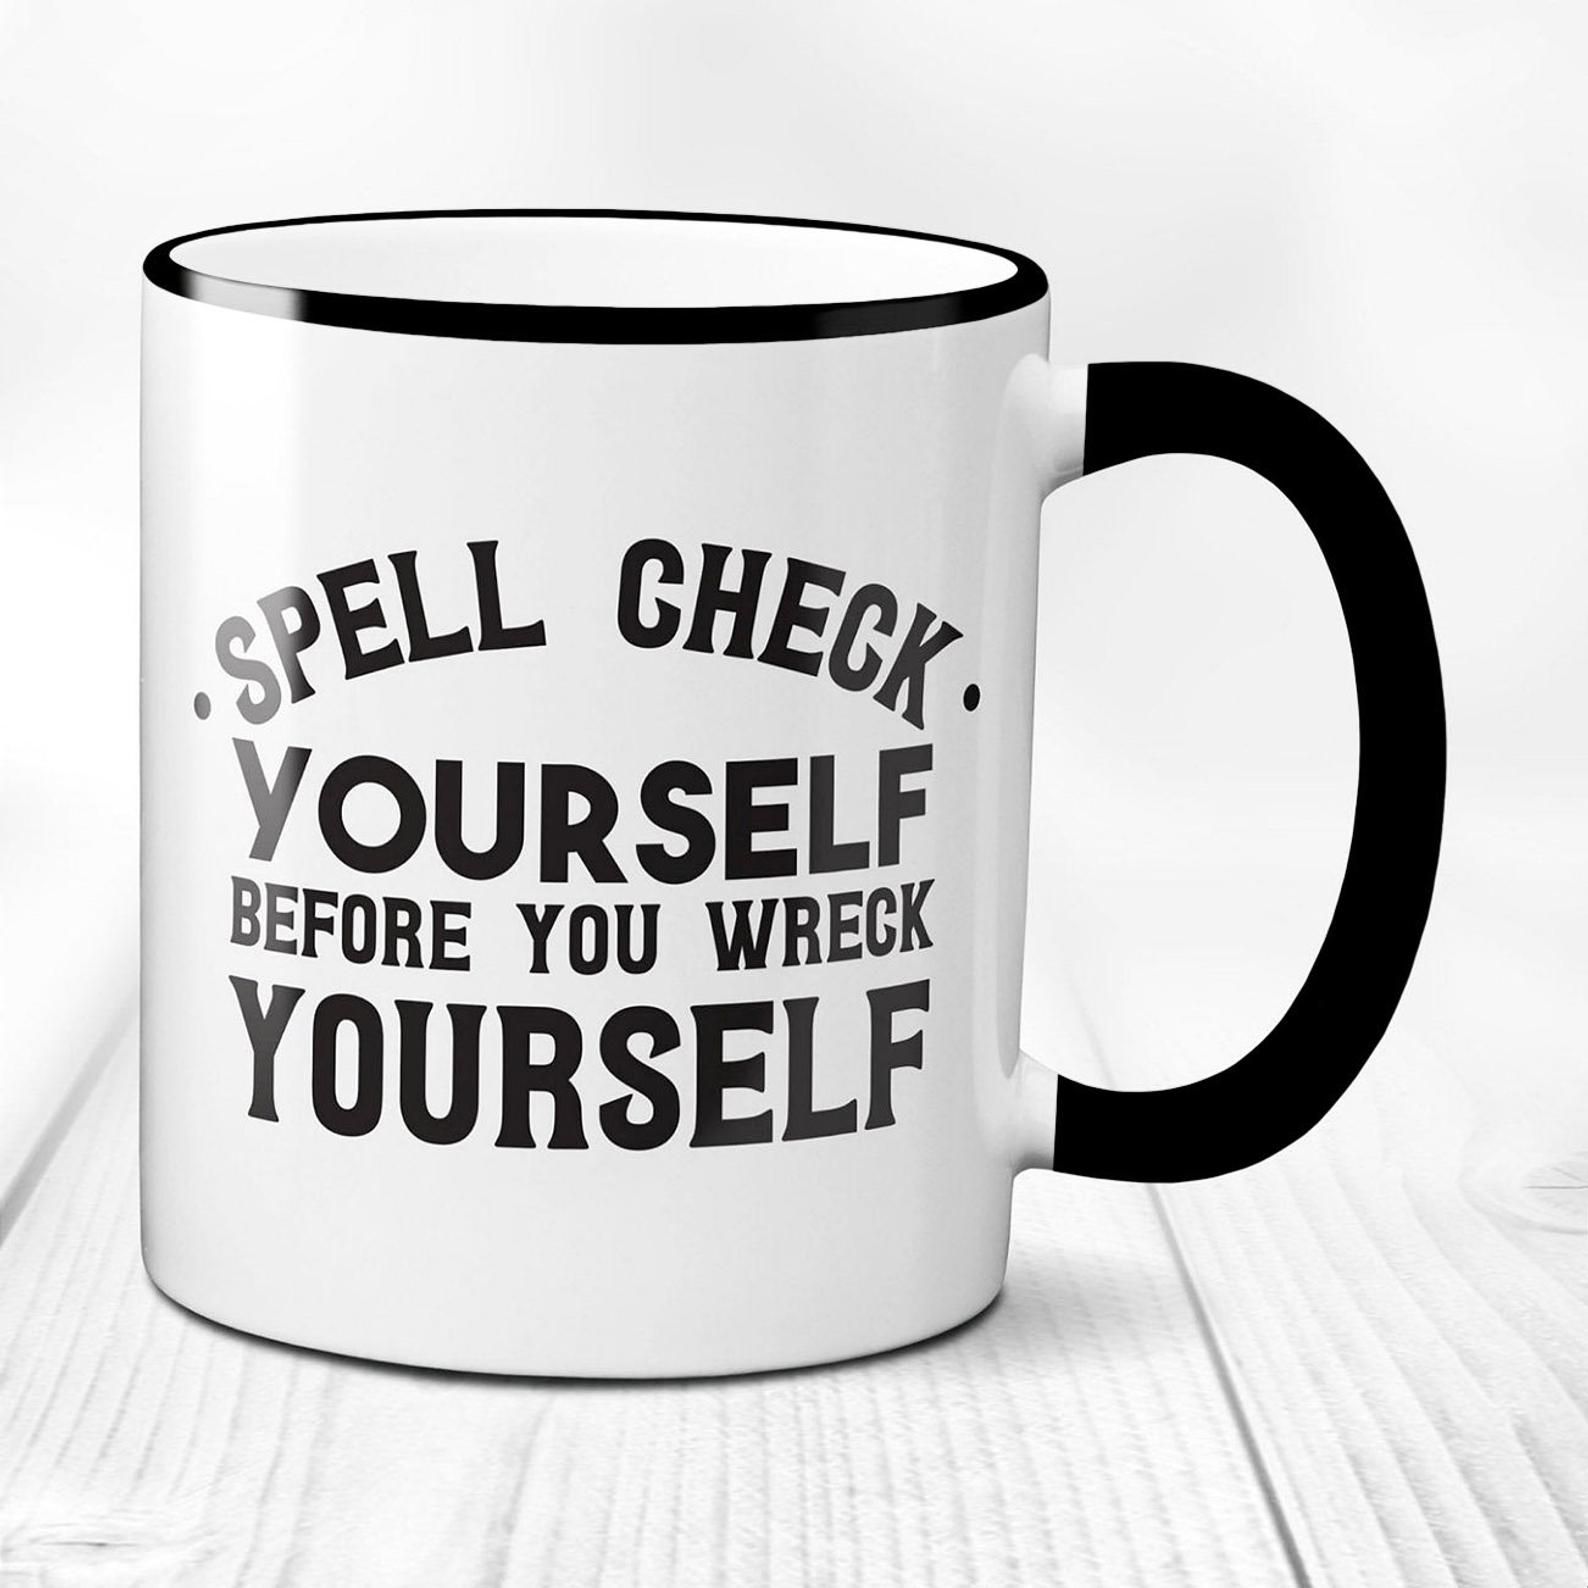 A mug that reads "Spell check yourself before you wreck yourself." The mug is white with a black handle.